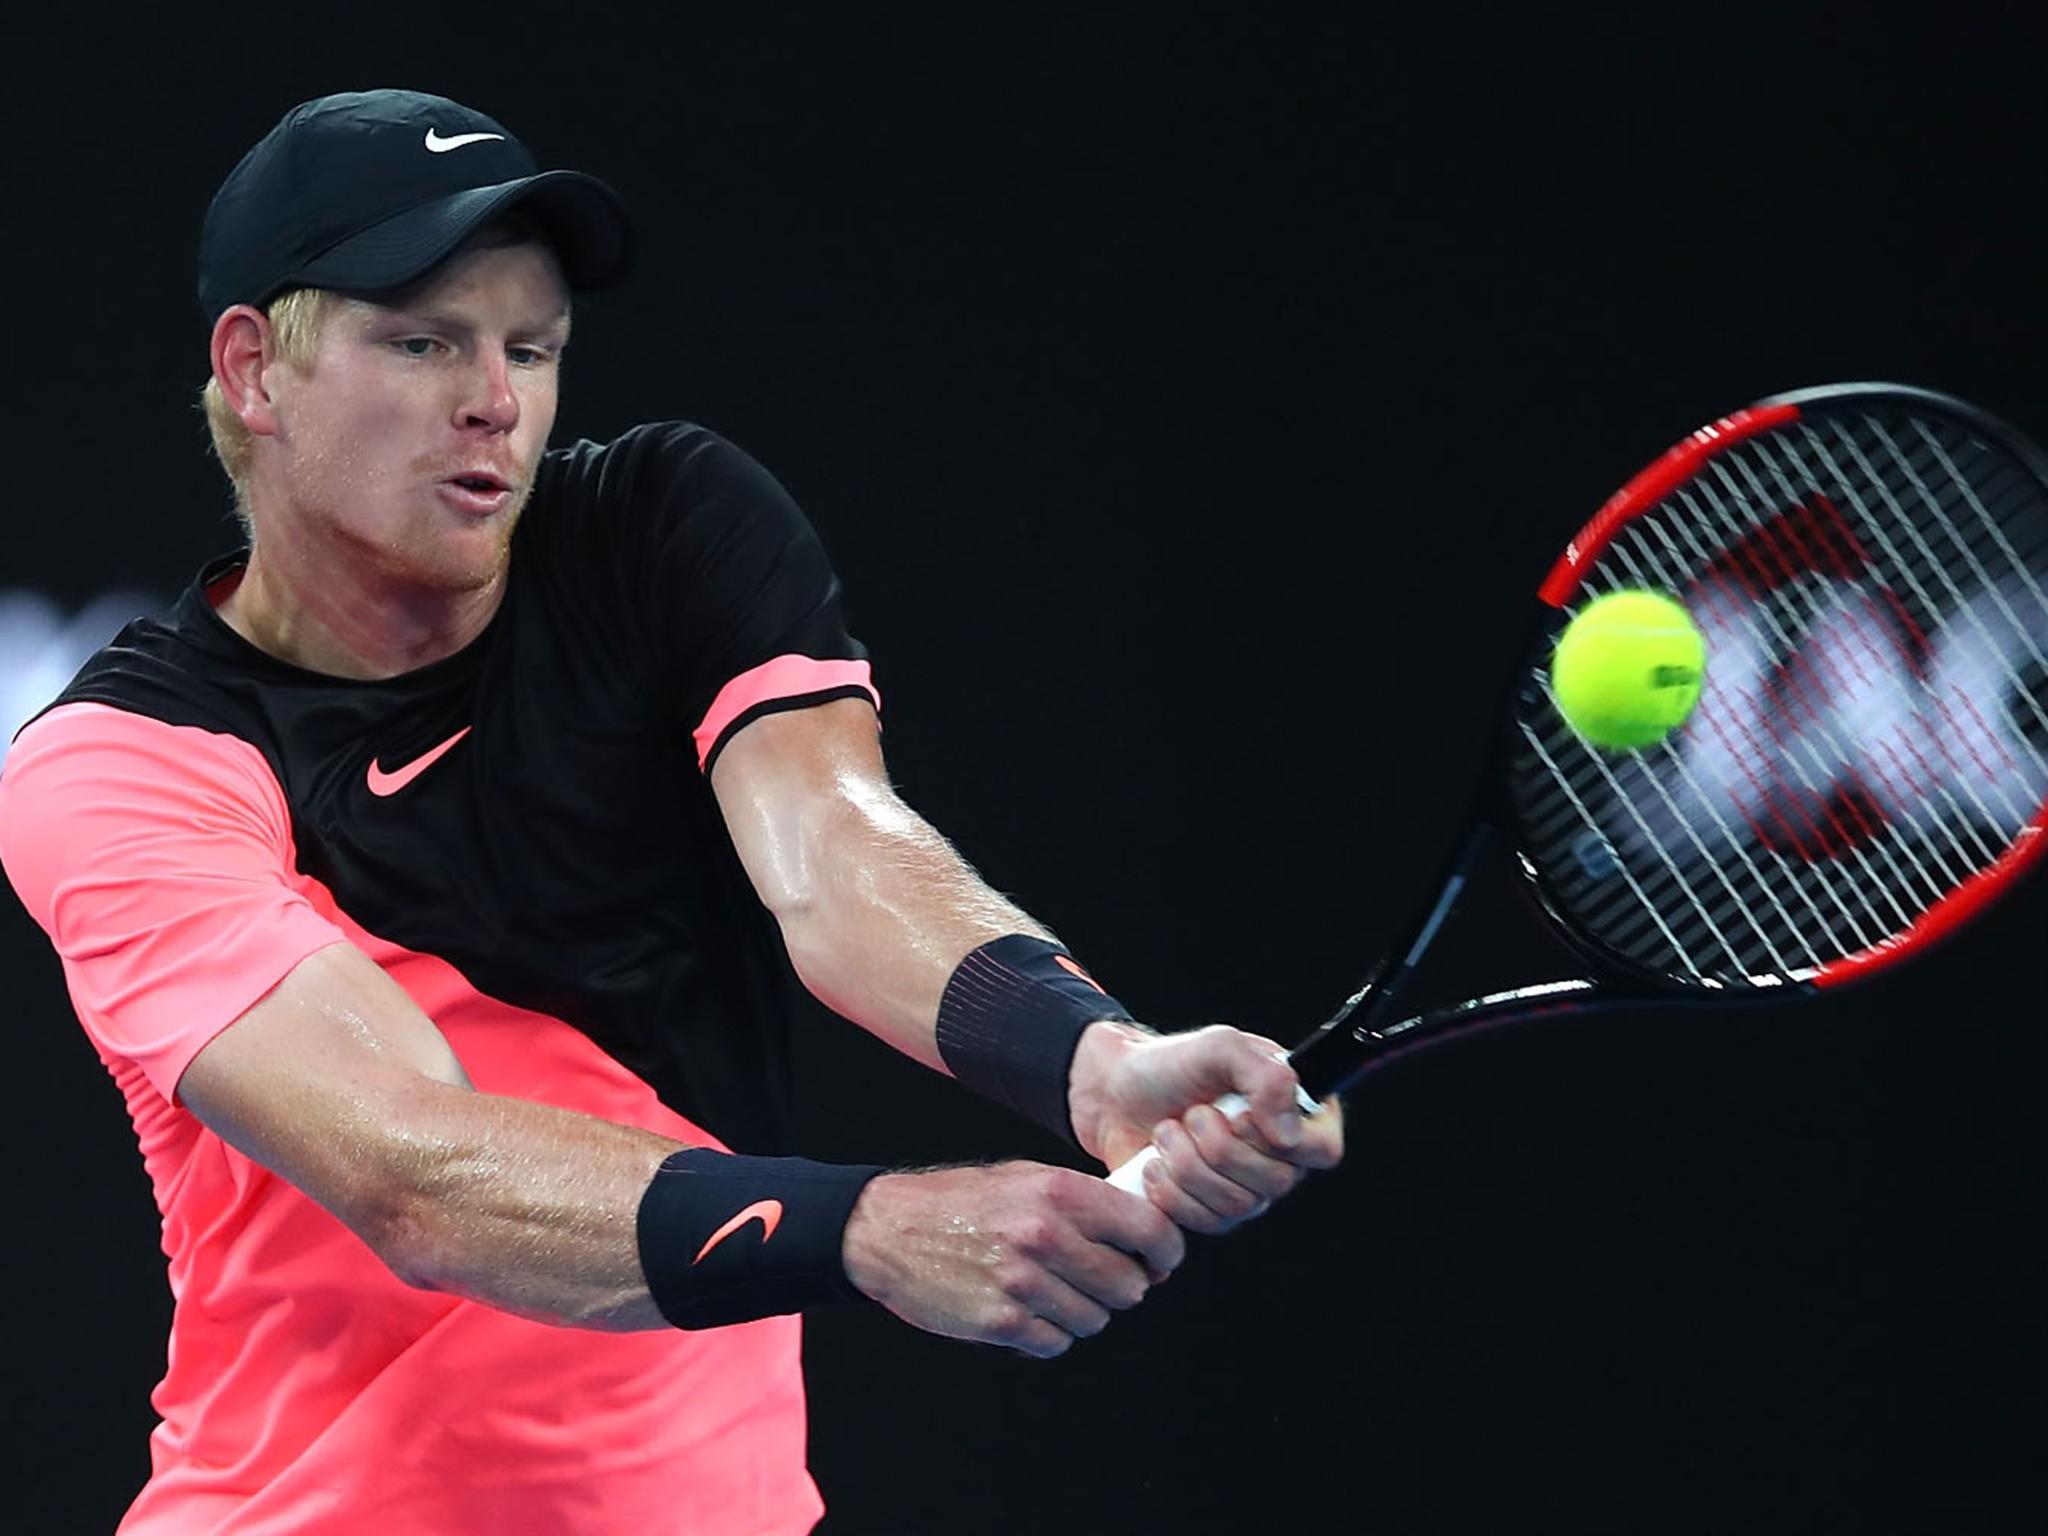 Kyle Edmund made it to the semi-finals for the first time at a Grand Slam